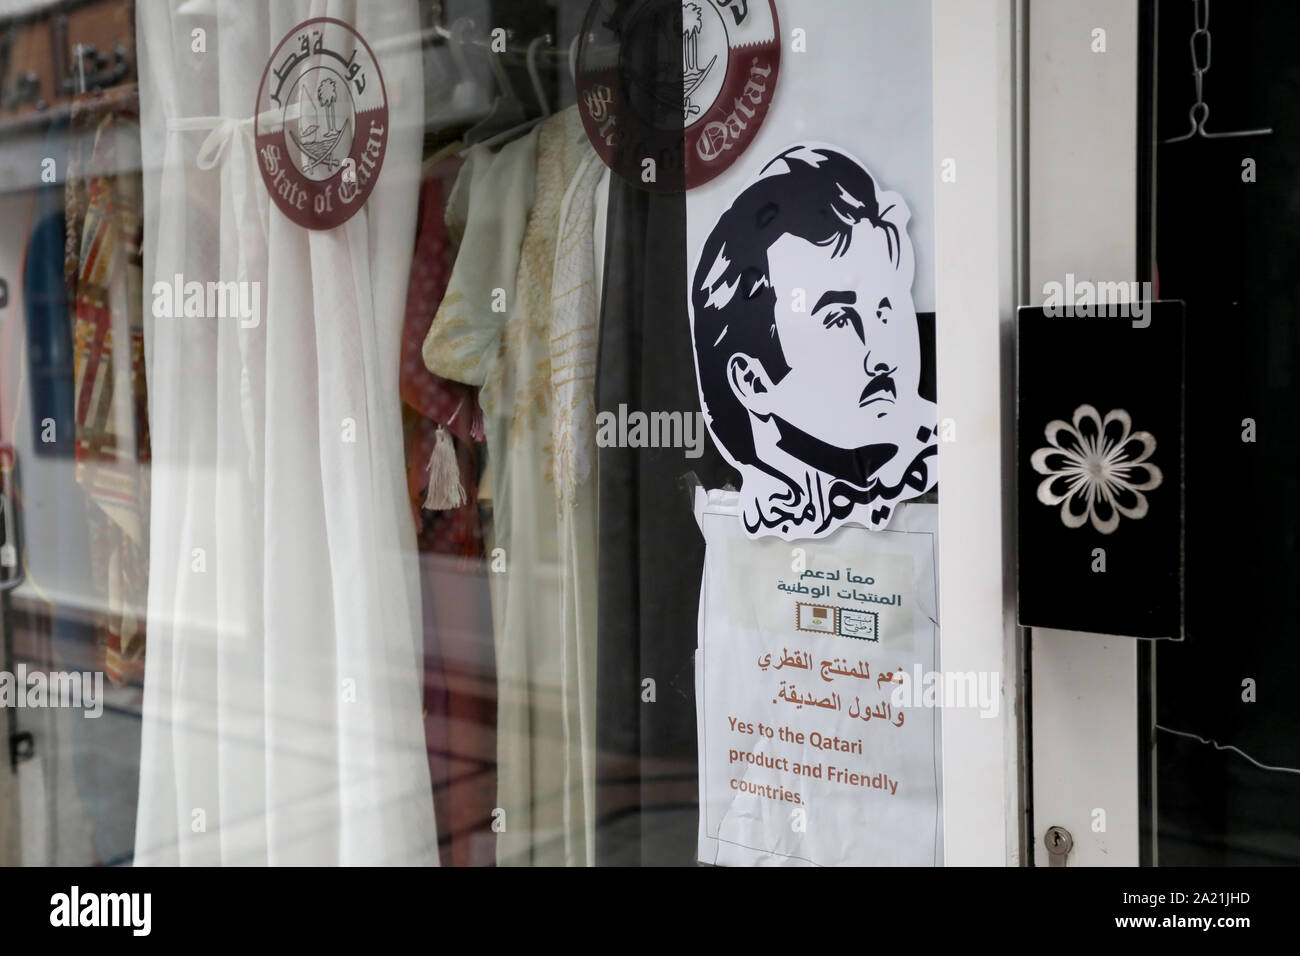 Doha / Qatar – September 30, 2019: A sign of protest at a fabric shop in Souq Waqif against the boycott of Qatar by neighbouring countries, saying it stocks products from Qatar and friendly countries Stock Photo